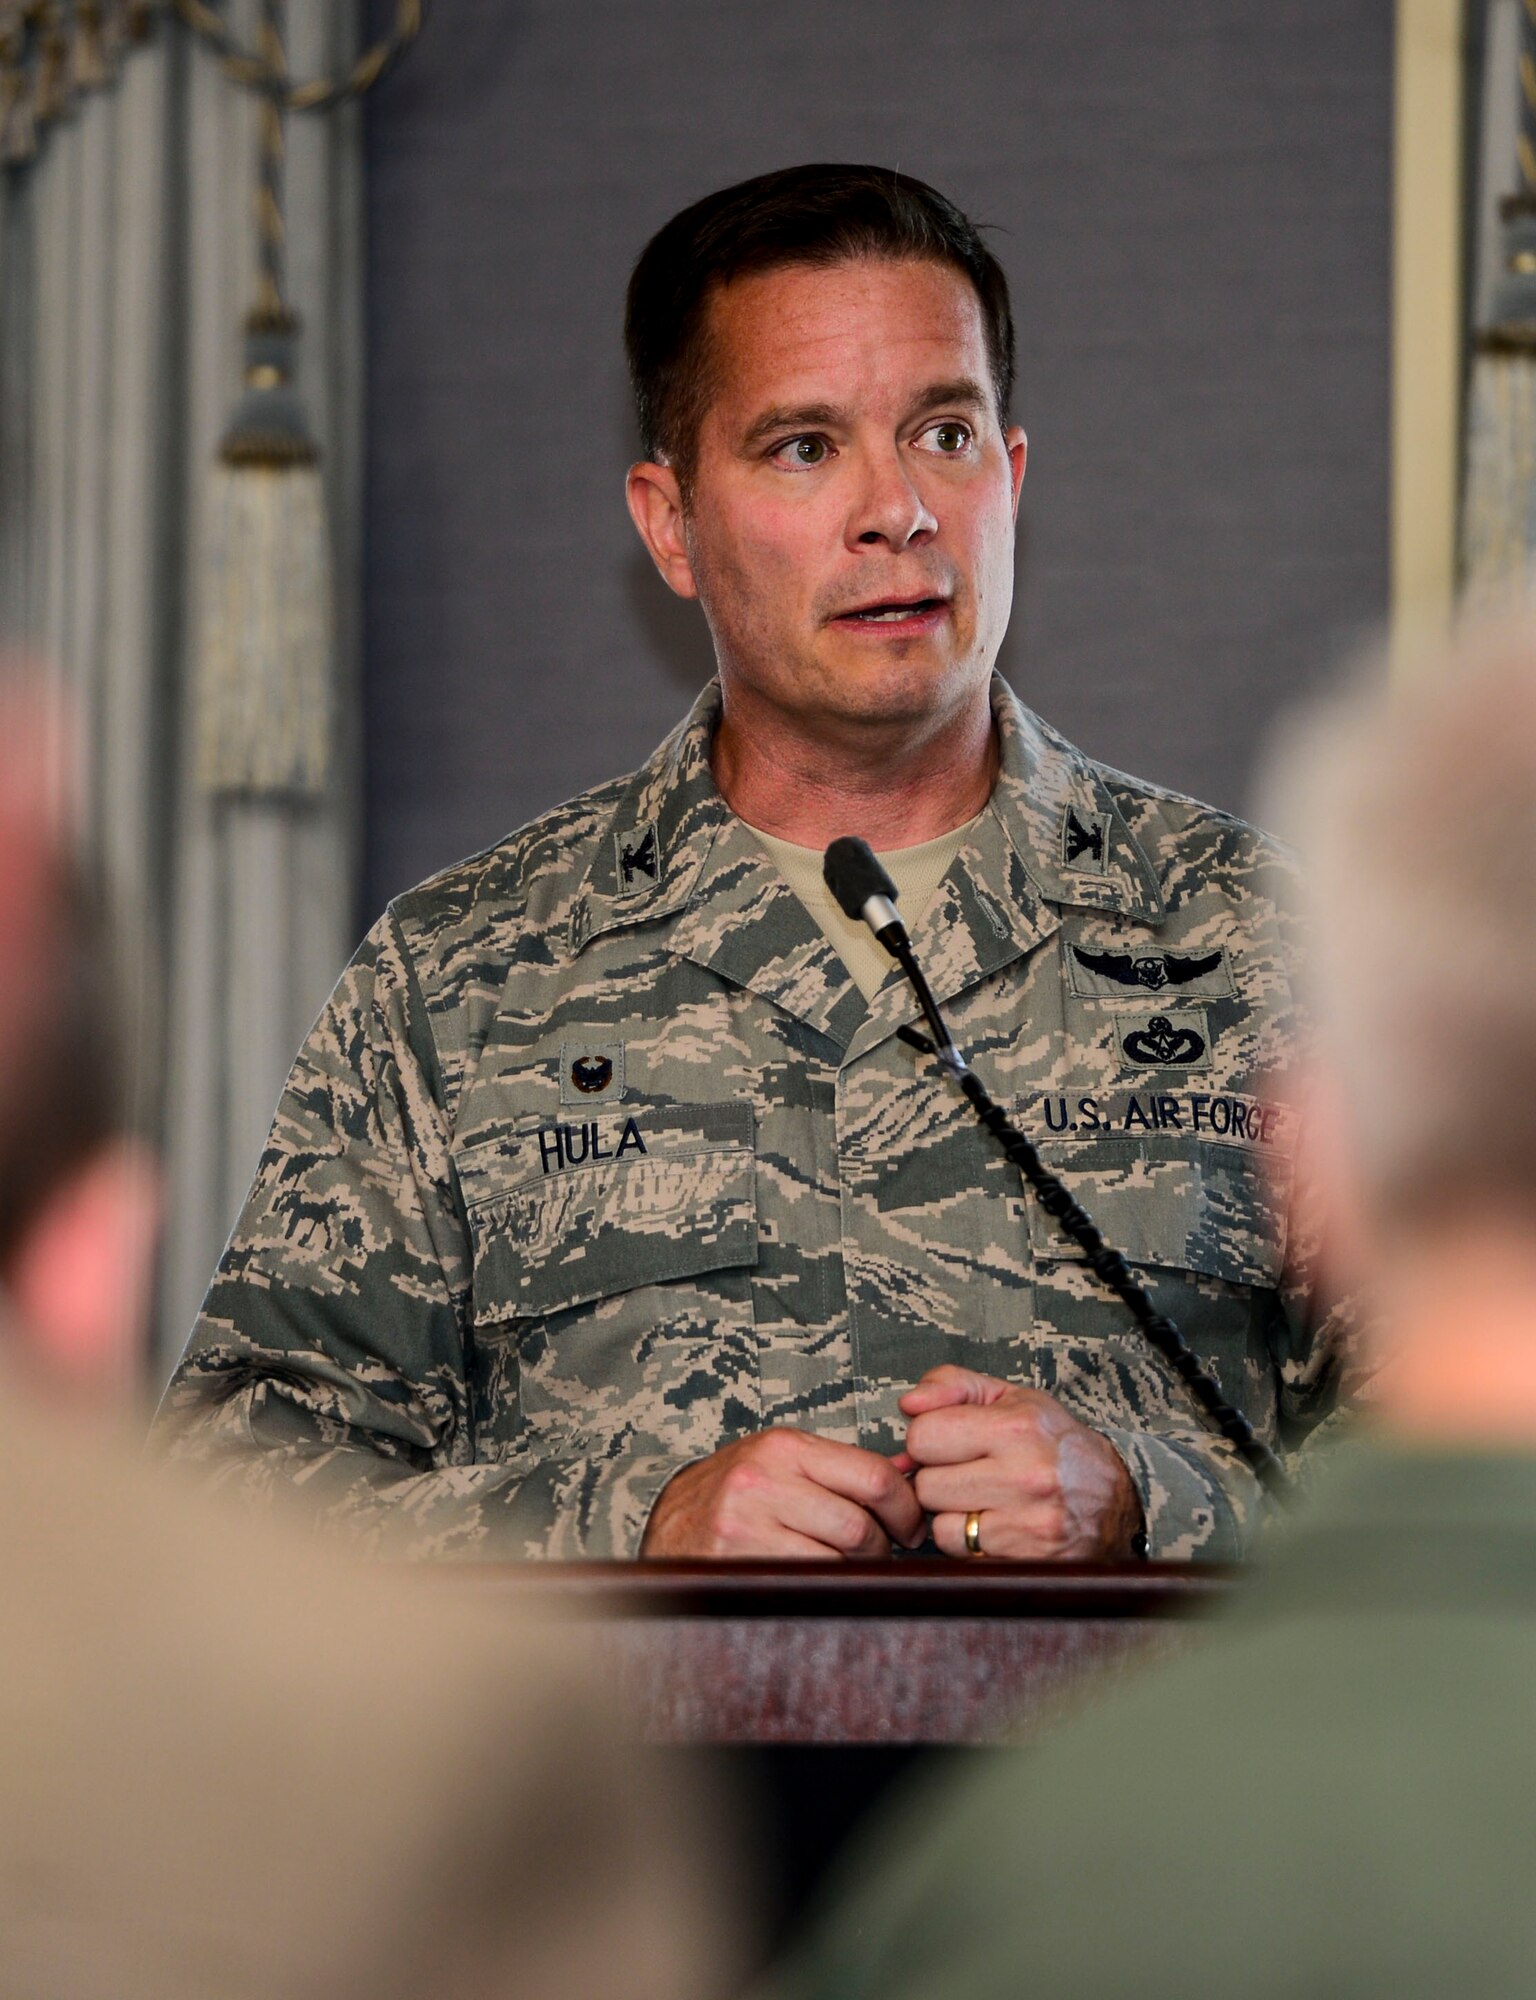 Col. Russell Hula, Air Force Installation and Mission Support Center Detachment 8 commander, gives remarks during his assumption of command ceremony at Joint Base Langley-Eustis, Va., April 24, 2015. Hula is responsible for managing AFIMSC’s assets to support Air Combat Command’s commanders and missions, which currently span 14 bases and more than 50 operating locations worldwide. (U.S. Air Force photo/Senior Airman Kayla Newman/Released)